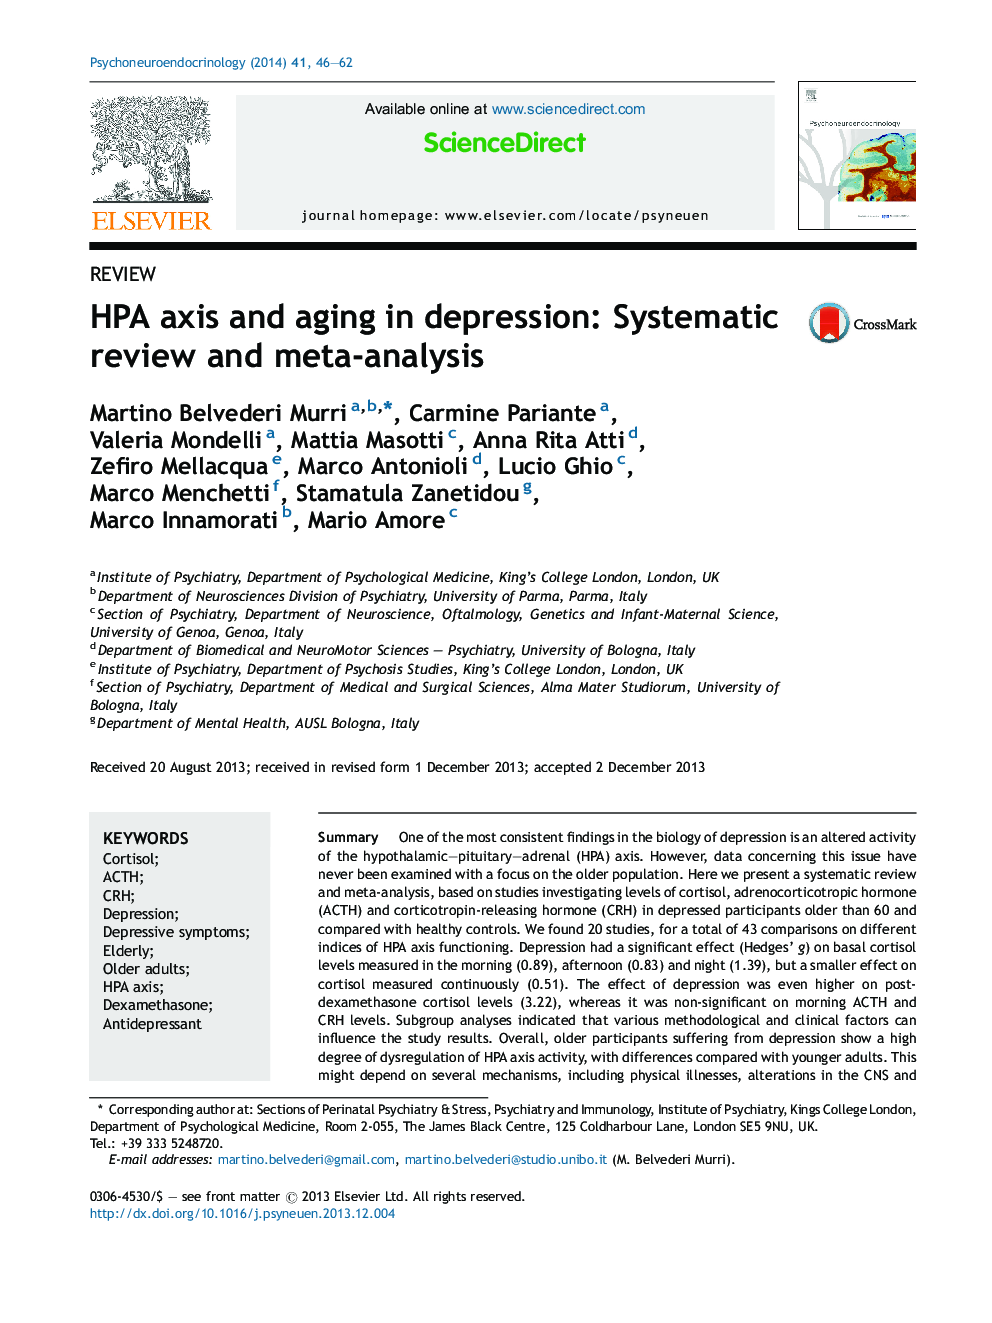 HPA axis and aging in depression: Systematic review and meta-analysis